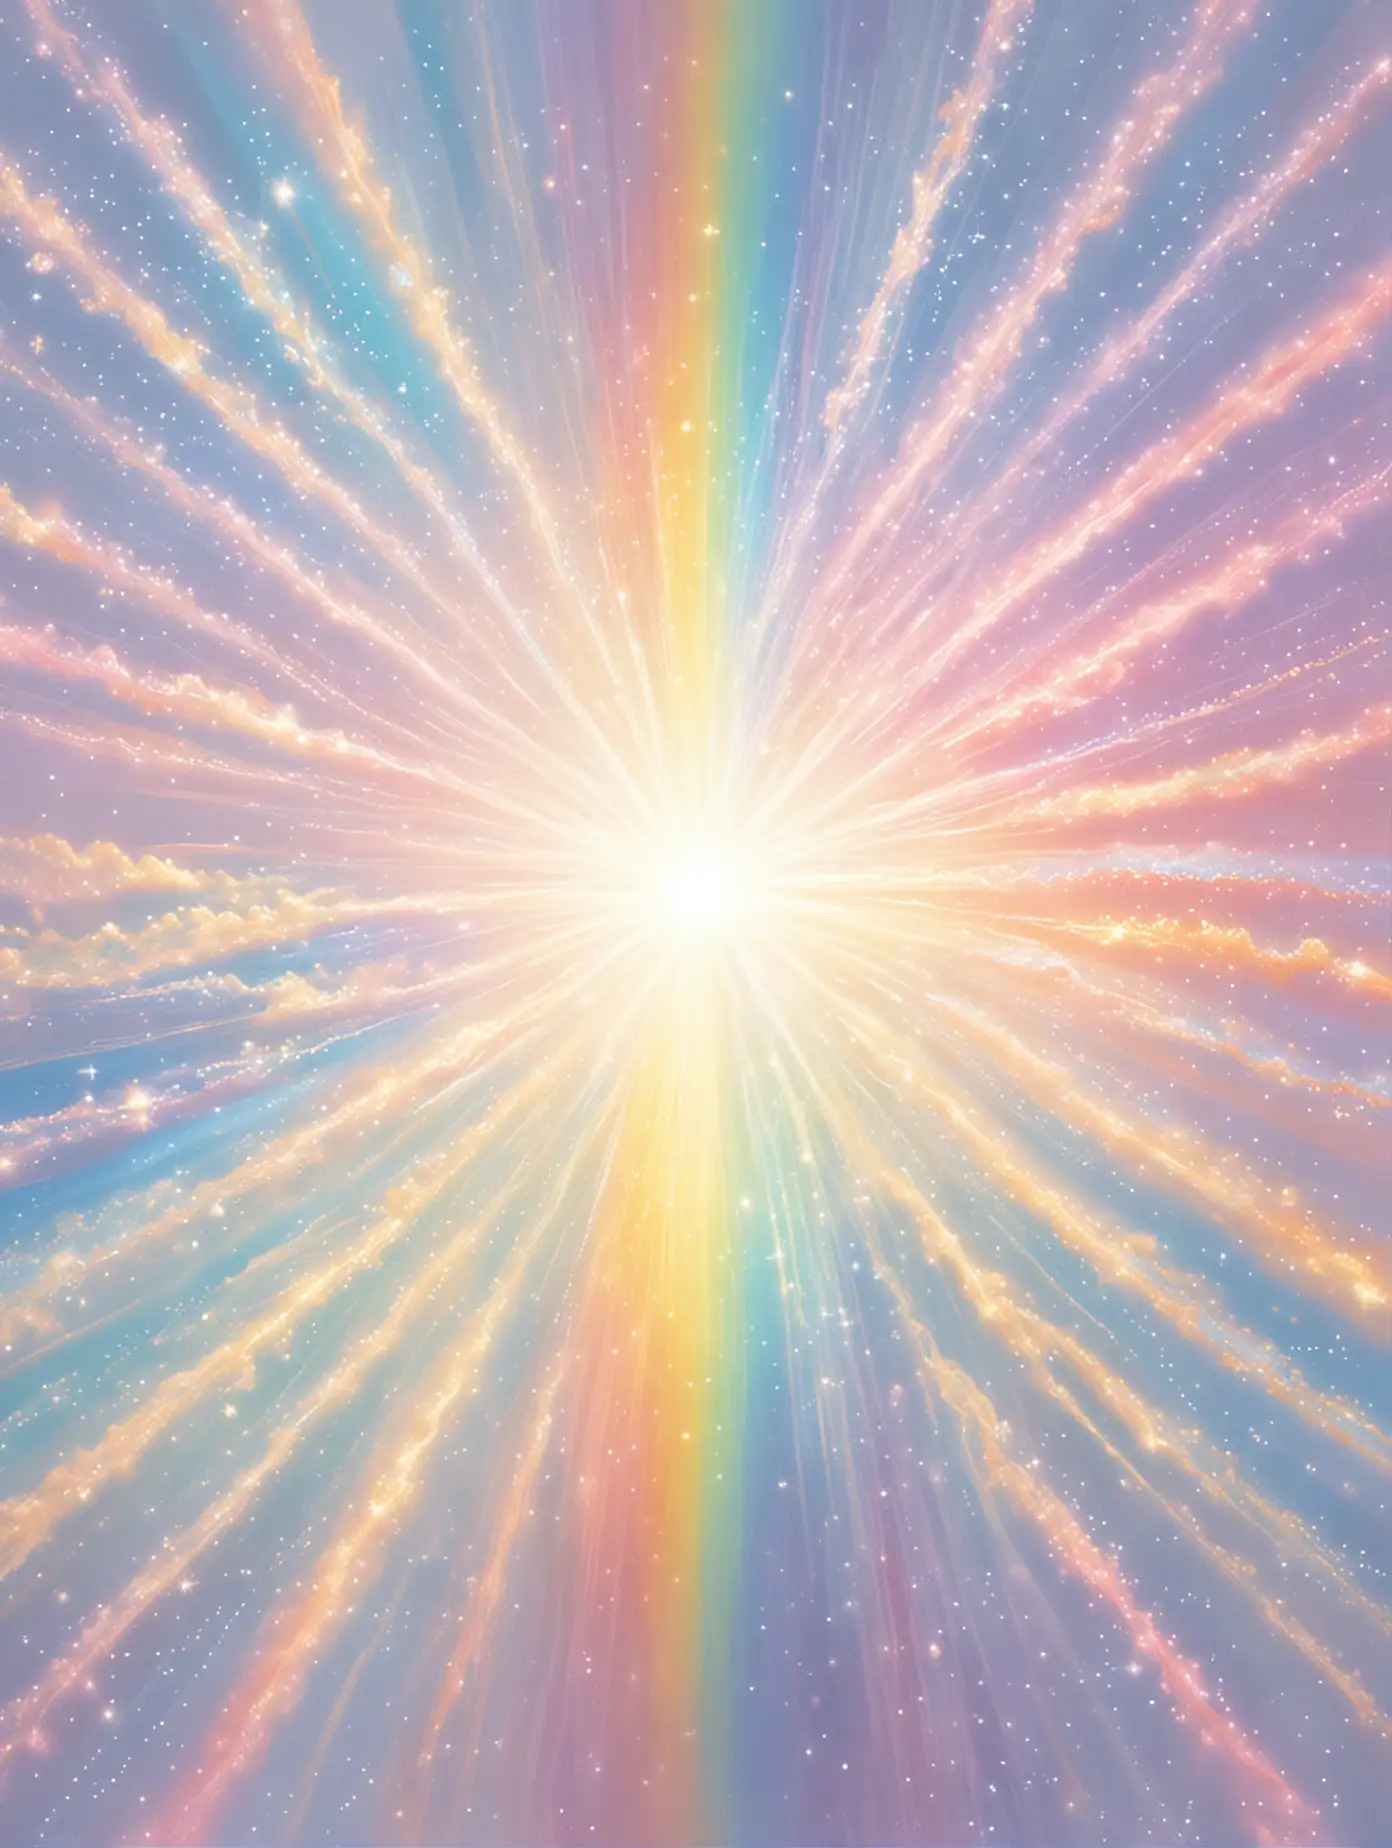 please create a pastel rainbow transcendent sparkly artwork of divine love, light, and rainbow rays coming out of the bright white sun
